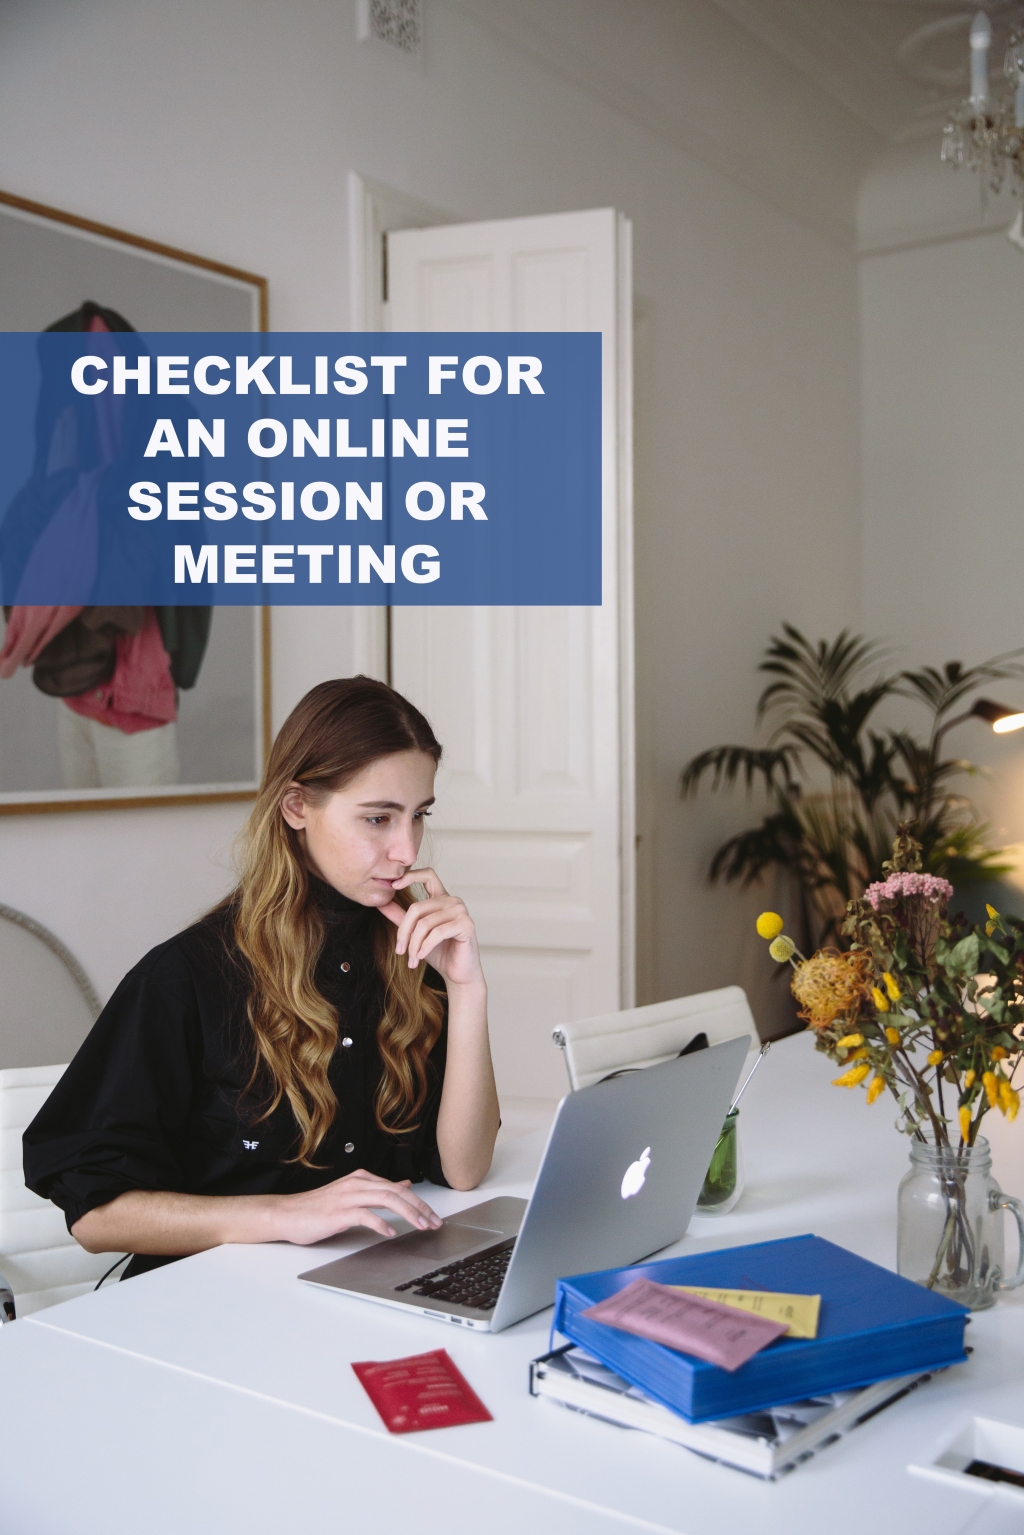 CHECKLIST FOR AN ONLINE SESSION OR MEETING